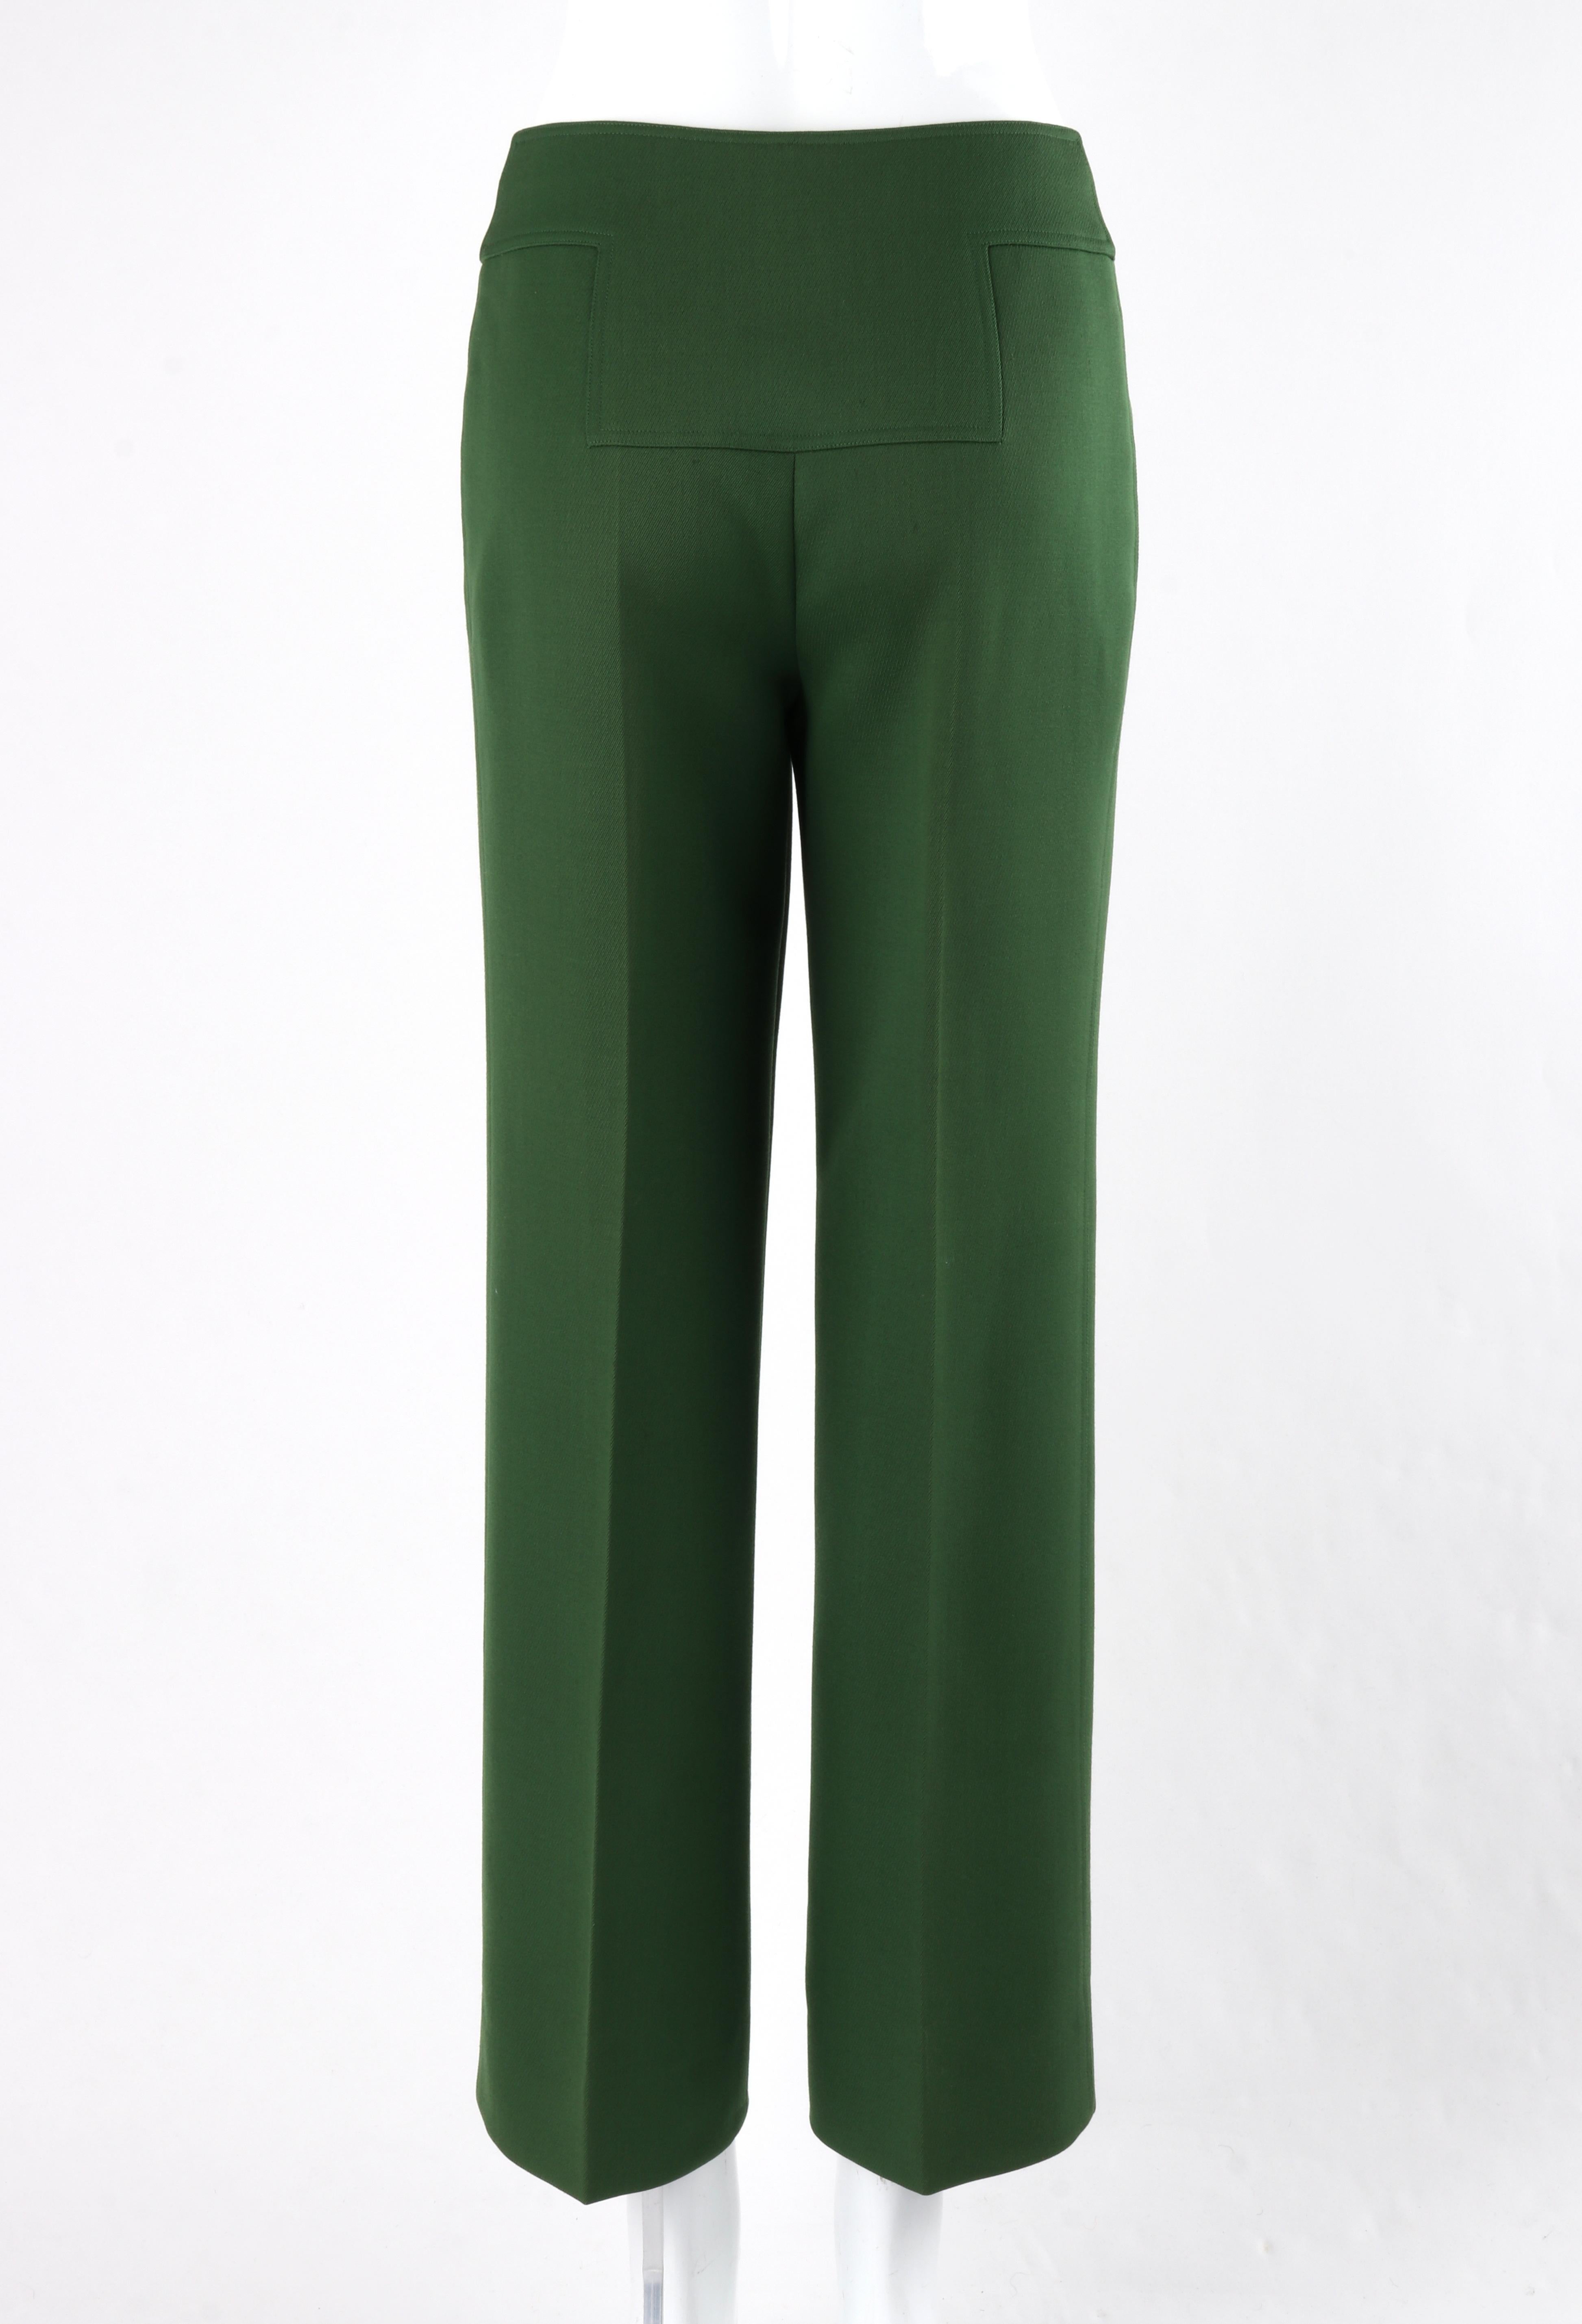 Black COURREGES c.1970’s Green Fitted Waistband Straight / Wide Leg Trouser Pants